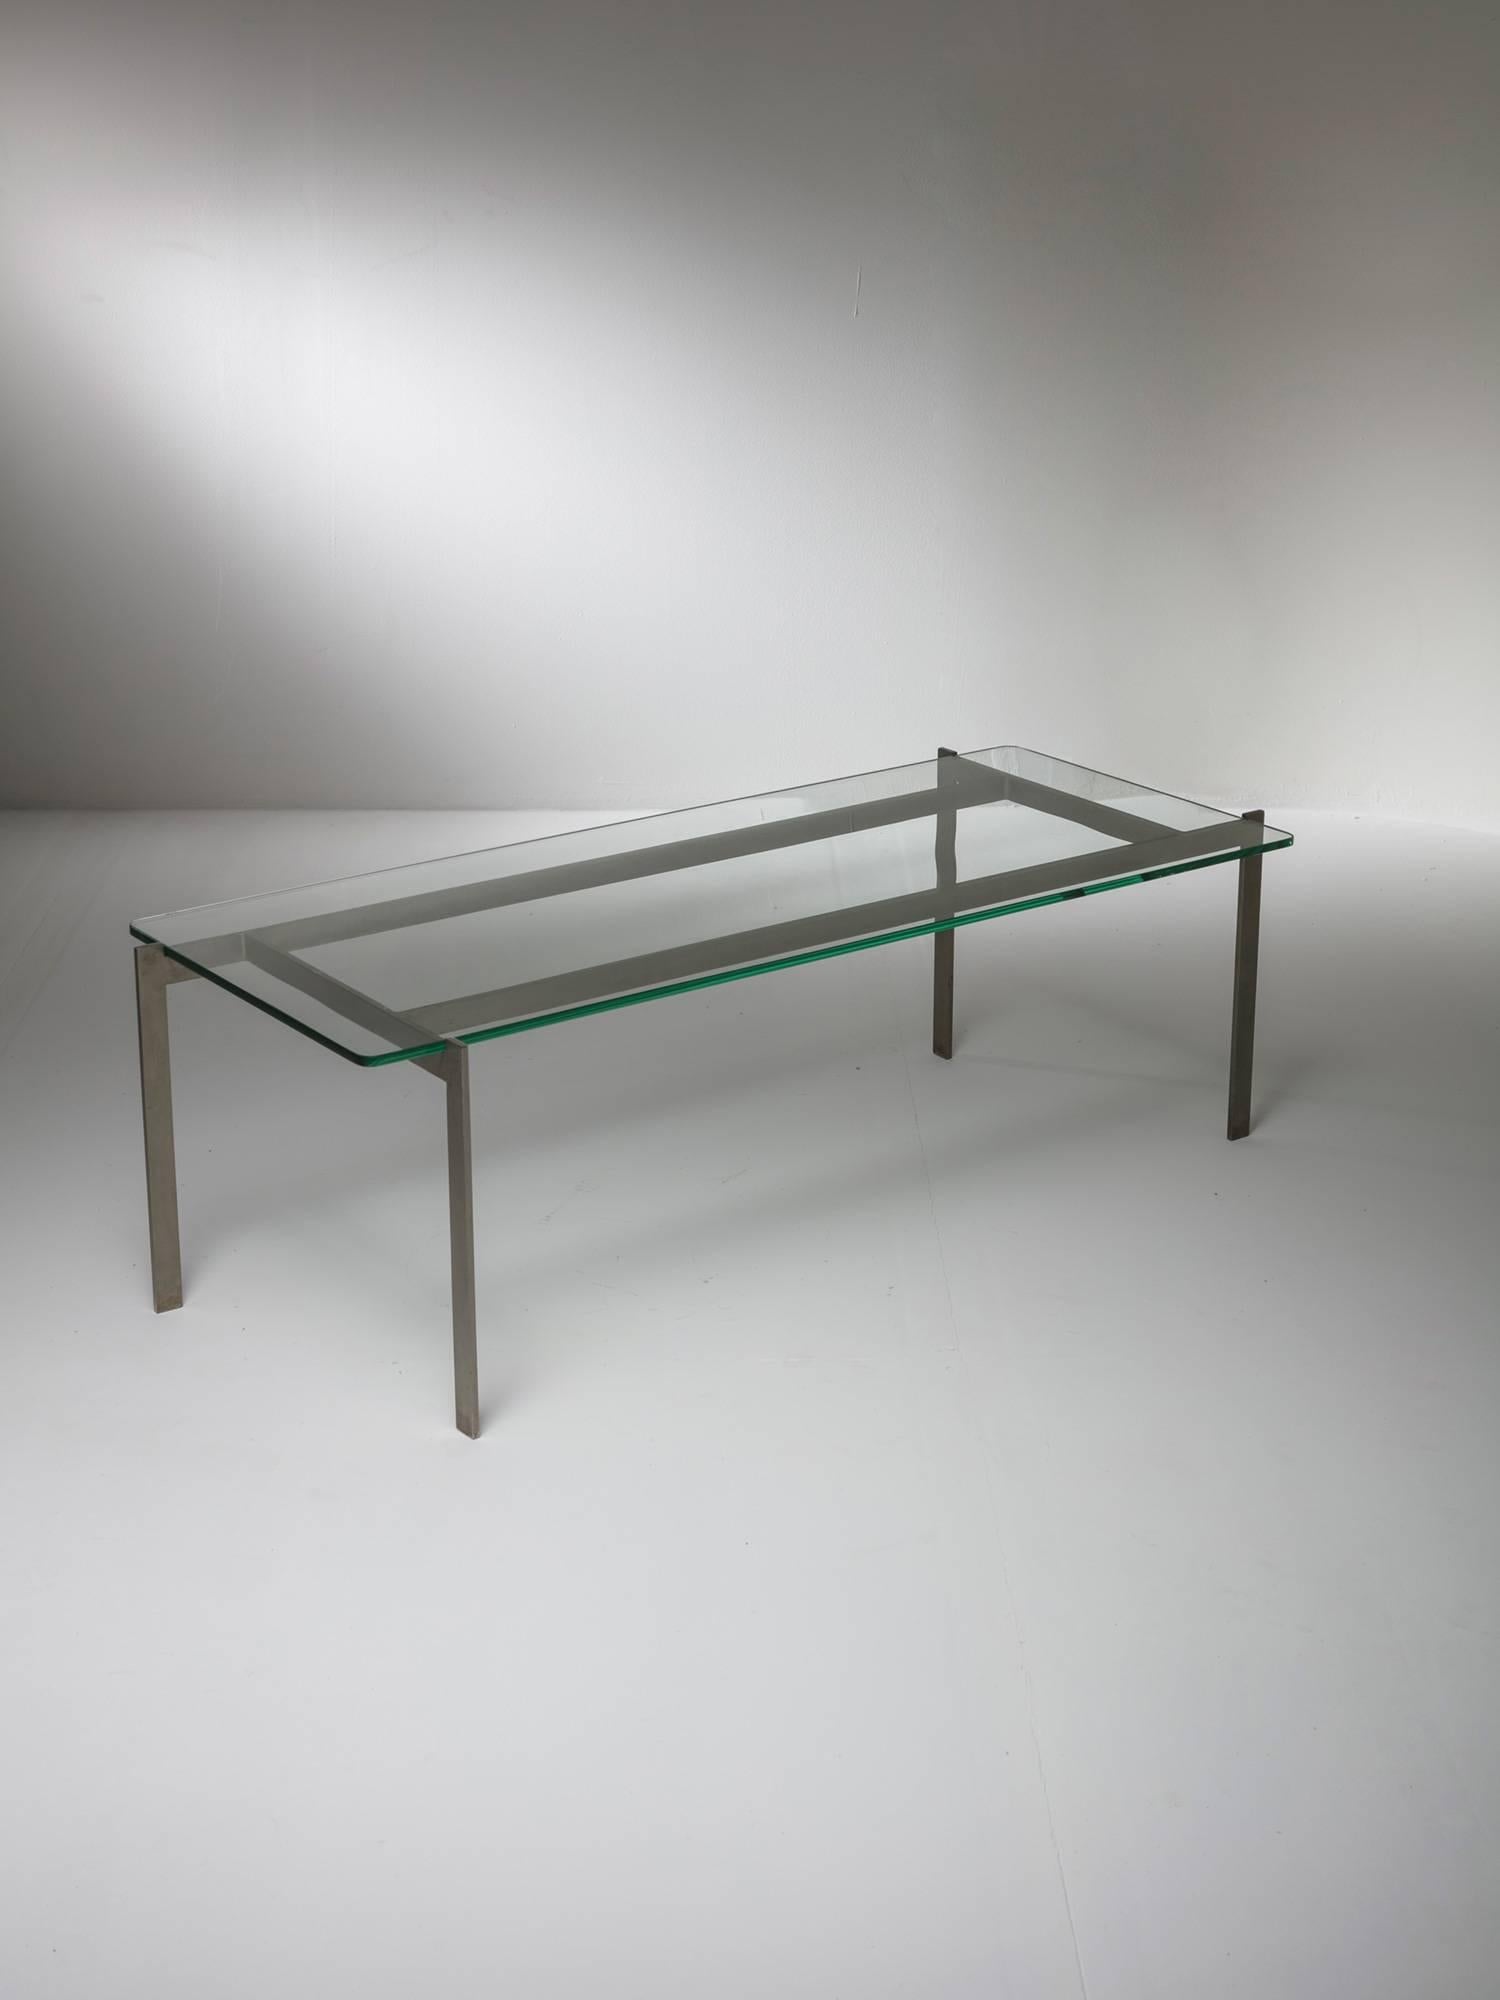 Low table by Paolo Tilche for Arform.
Thick glass top locked to the metal frame visually connected to Poul Kjaerholm design.